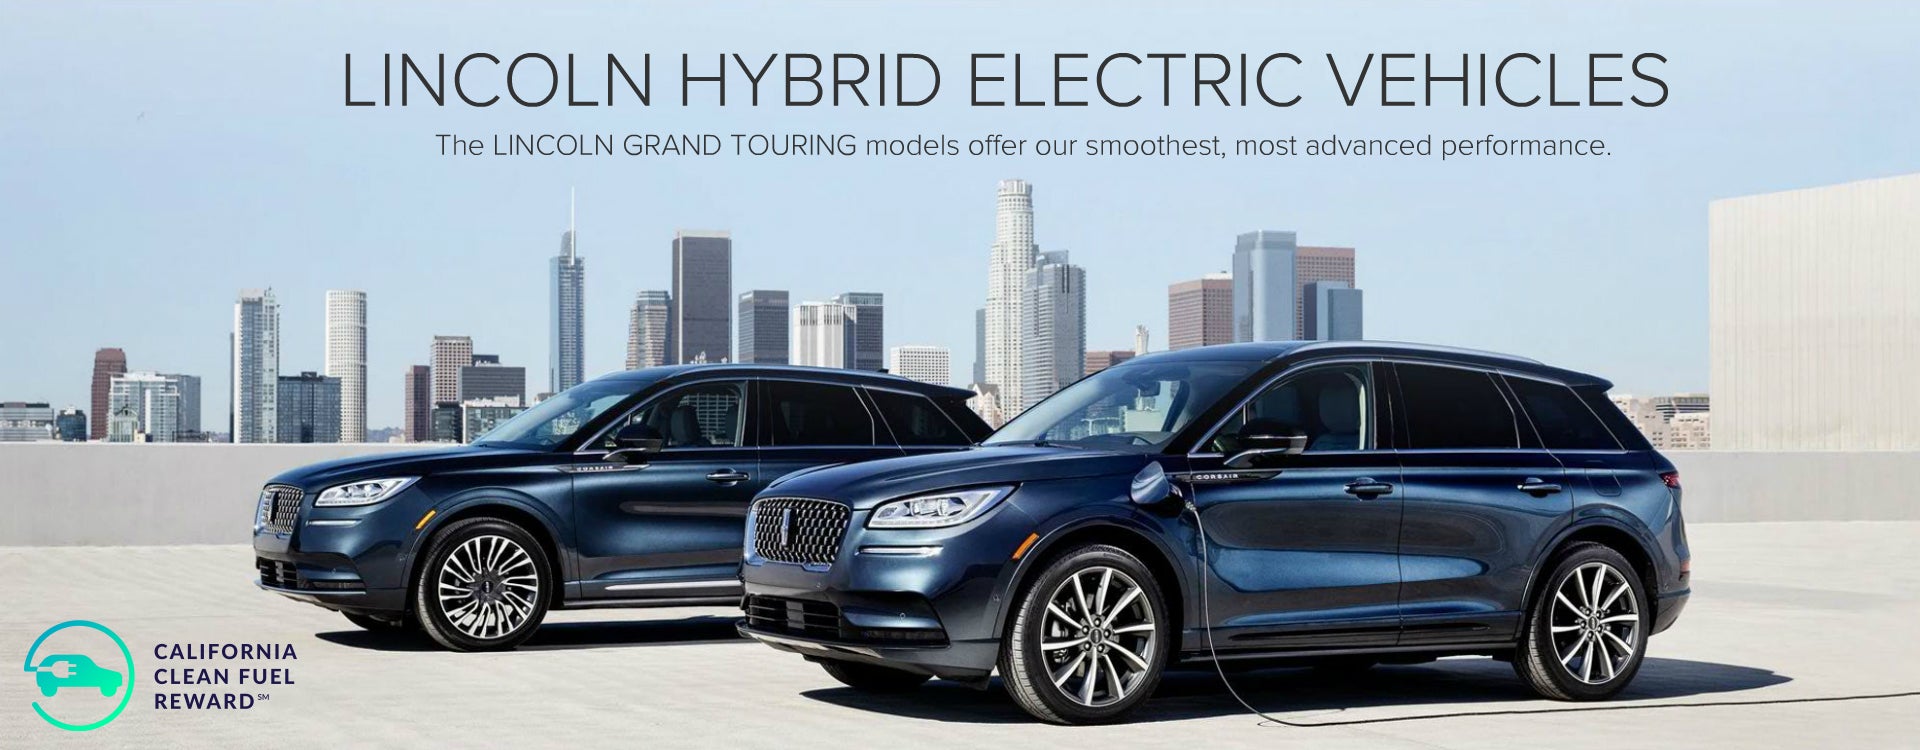 Lincoln Hybrid Electric Vehicles